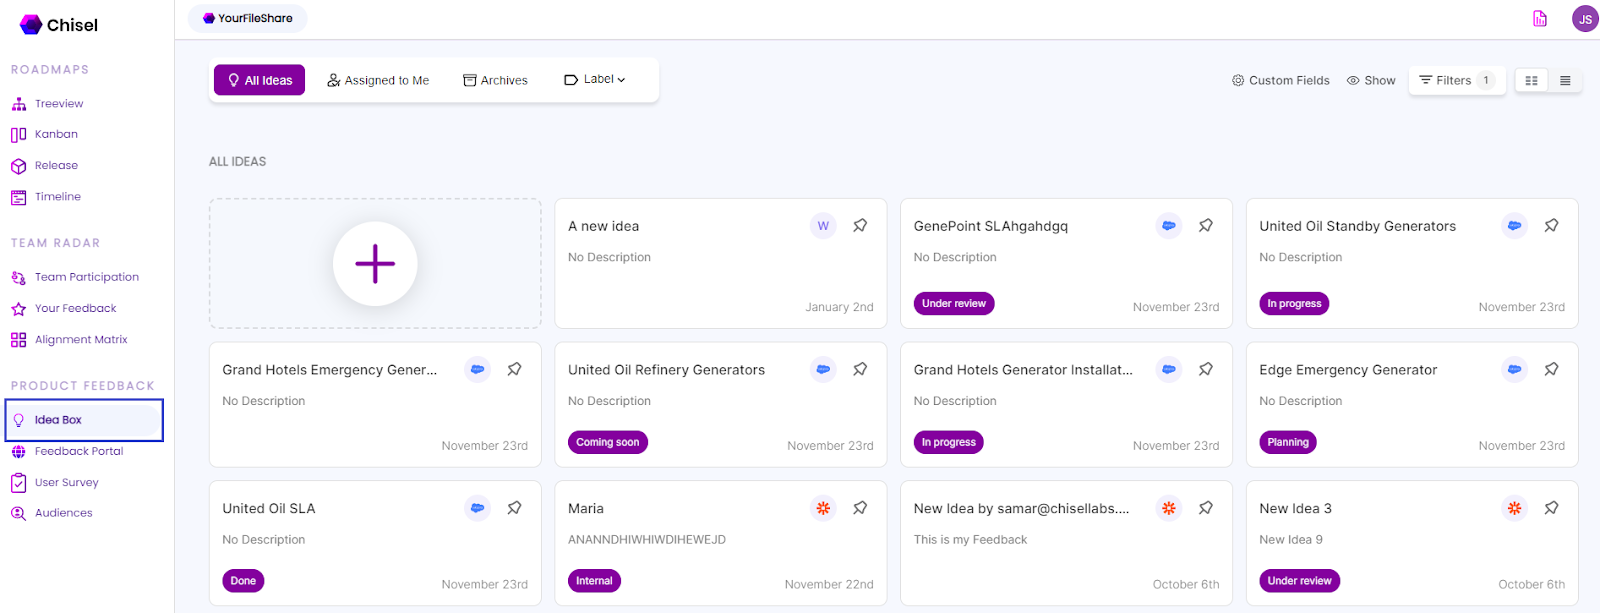 A visual representation of Chisel’s Ideabox, a platform to collect and organize ideas, product feature requests, and suggestions from customers and team members.